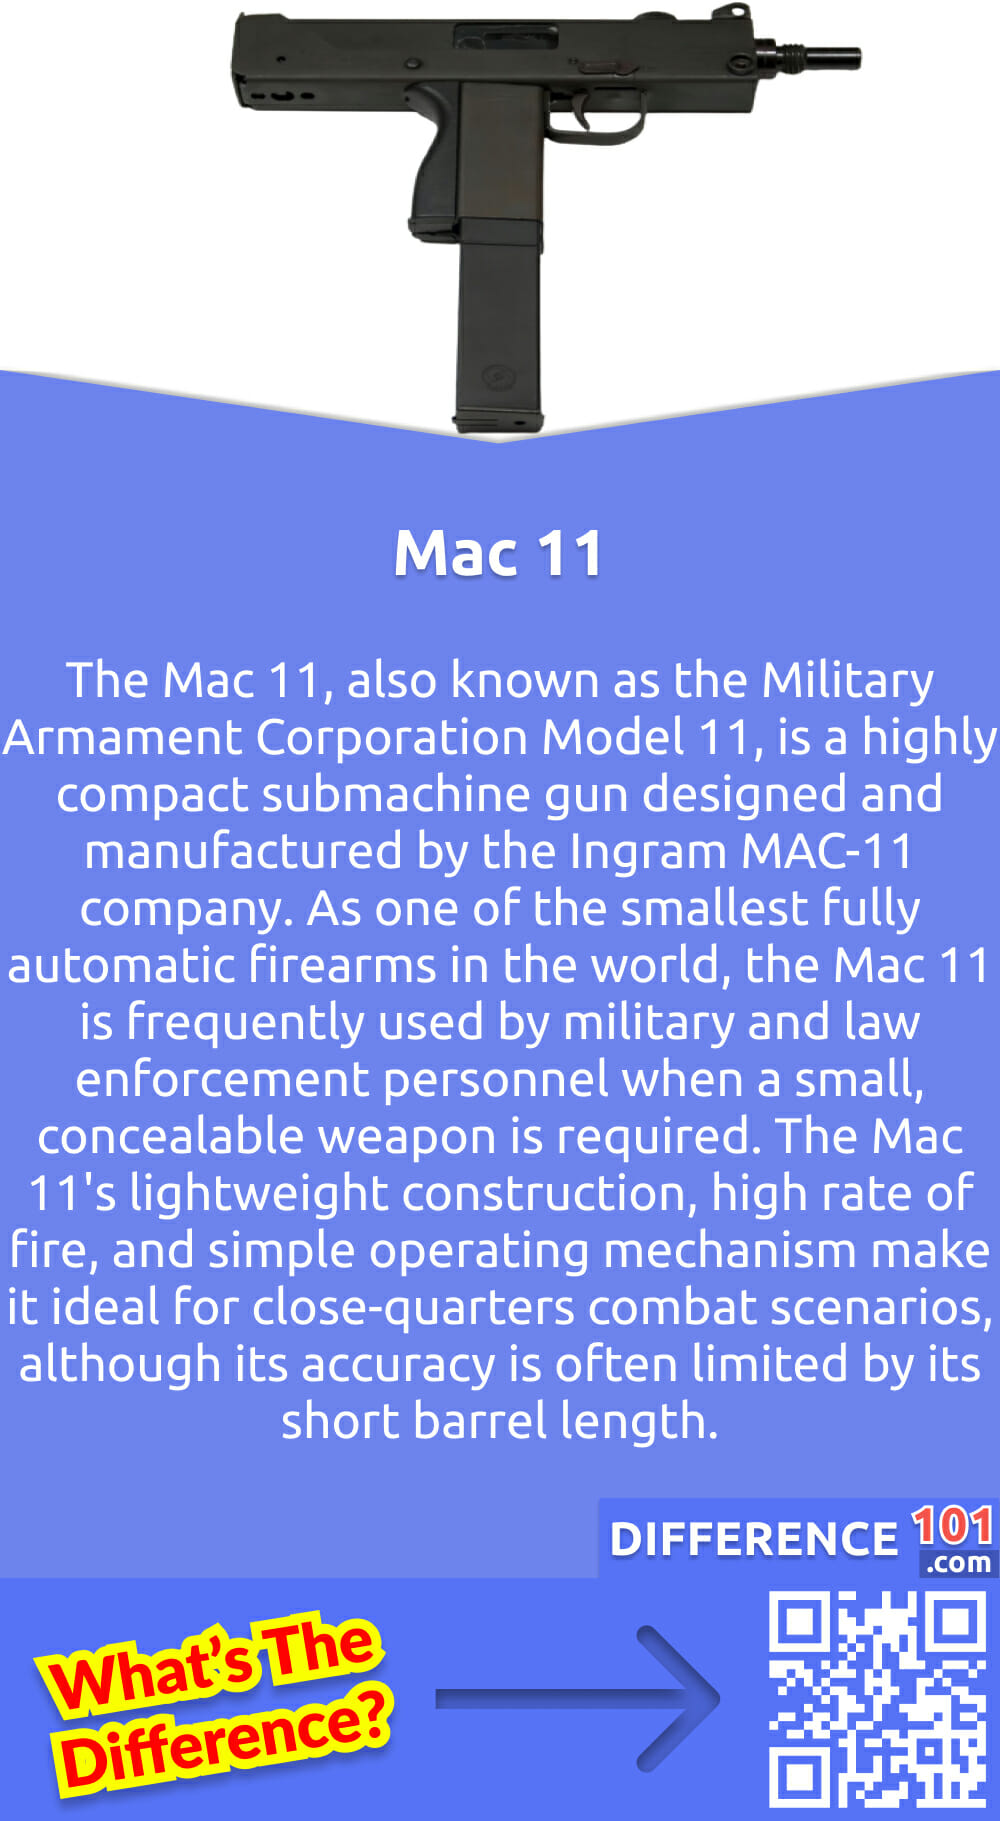 What Is Mac 11? The Mac 11, also known as the Military Armament Corporation Model 11, is a highly compact submachine gun designed and manufactured by the Ingram MAC-11 company. As one of the smallest fully automatic firearms in the world, the Mac 11 is frequently used by military and law enforcement personnel when a small, concealable weapon is required. The Mac 11's lightweight construction, high rate of fire, and simple operating mechanism make it ideal for close-quarters combat scenarios, although its accuracy is often limited by its short barrel length. Despite some controversy surrounding its capacity and potential for illicit use, the Mac 11 remains a popular choice amongst those in need of a highly concealable and versatile weapon.